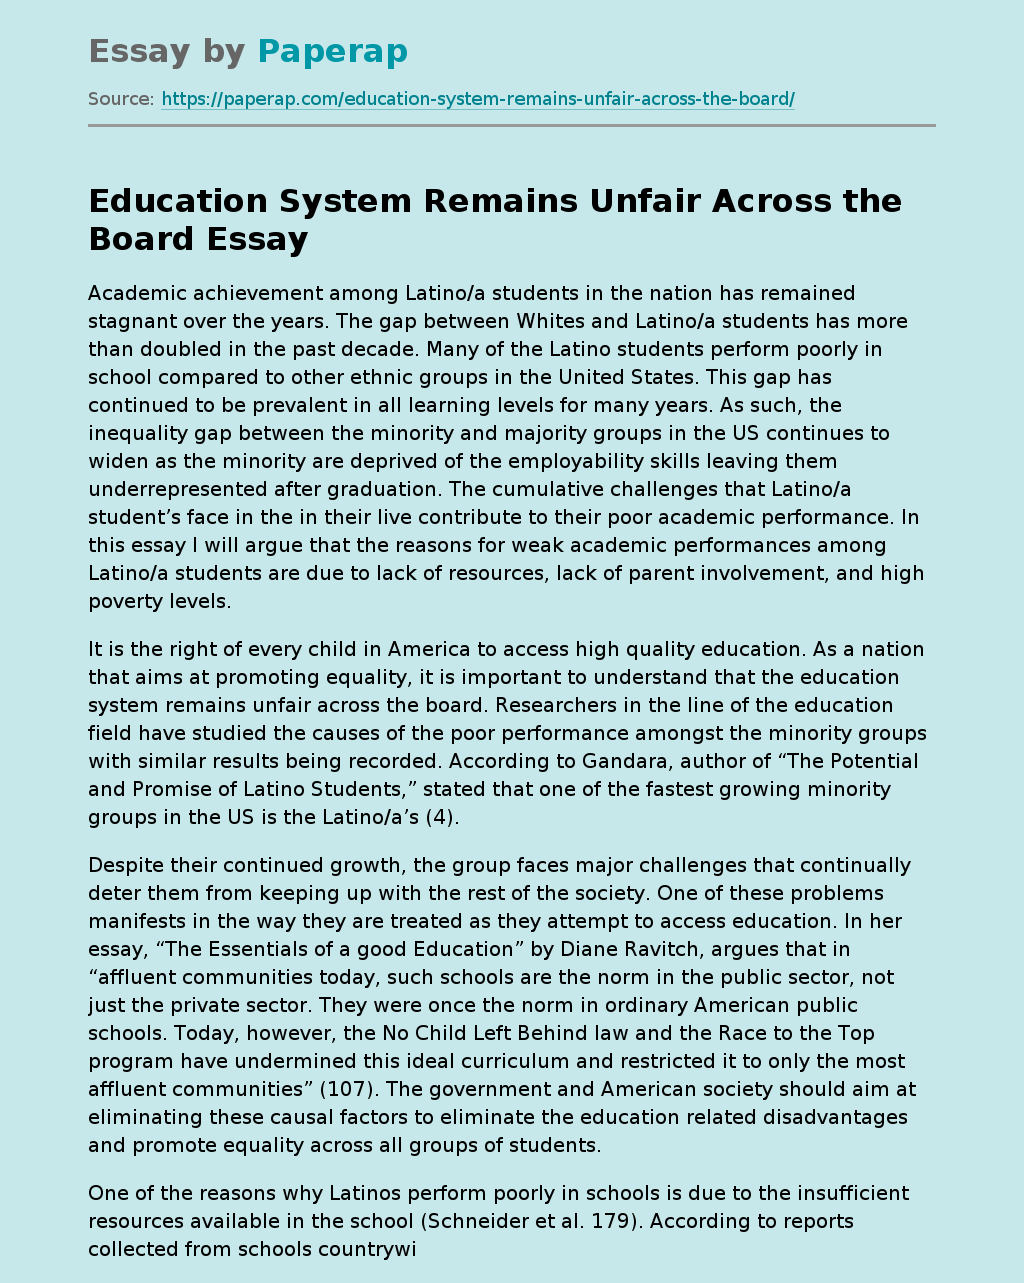 Education System Remains Unfair Across the Board